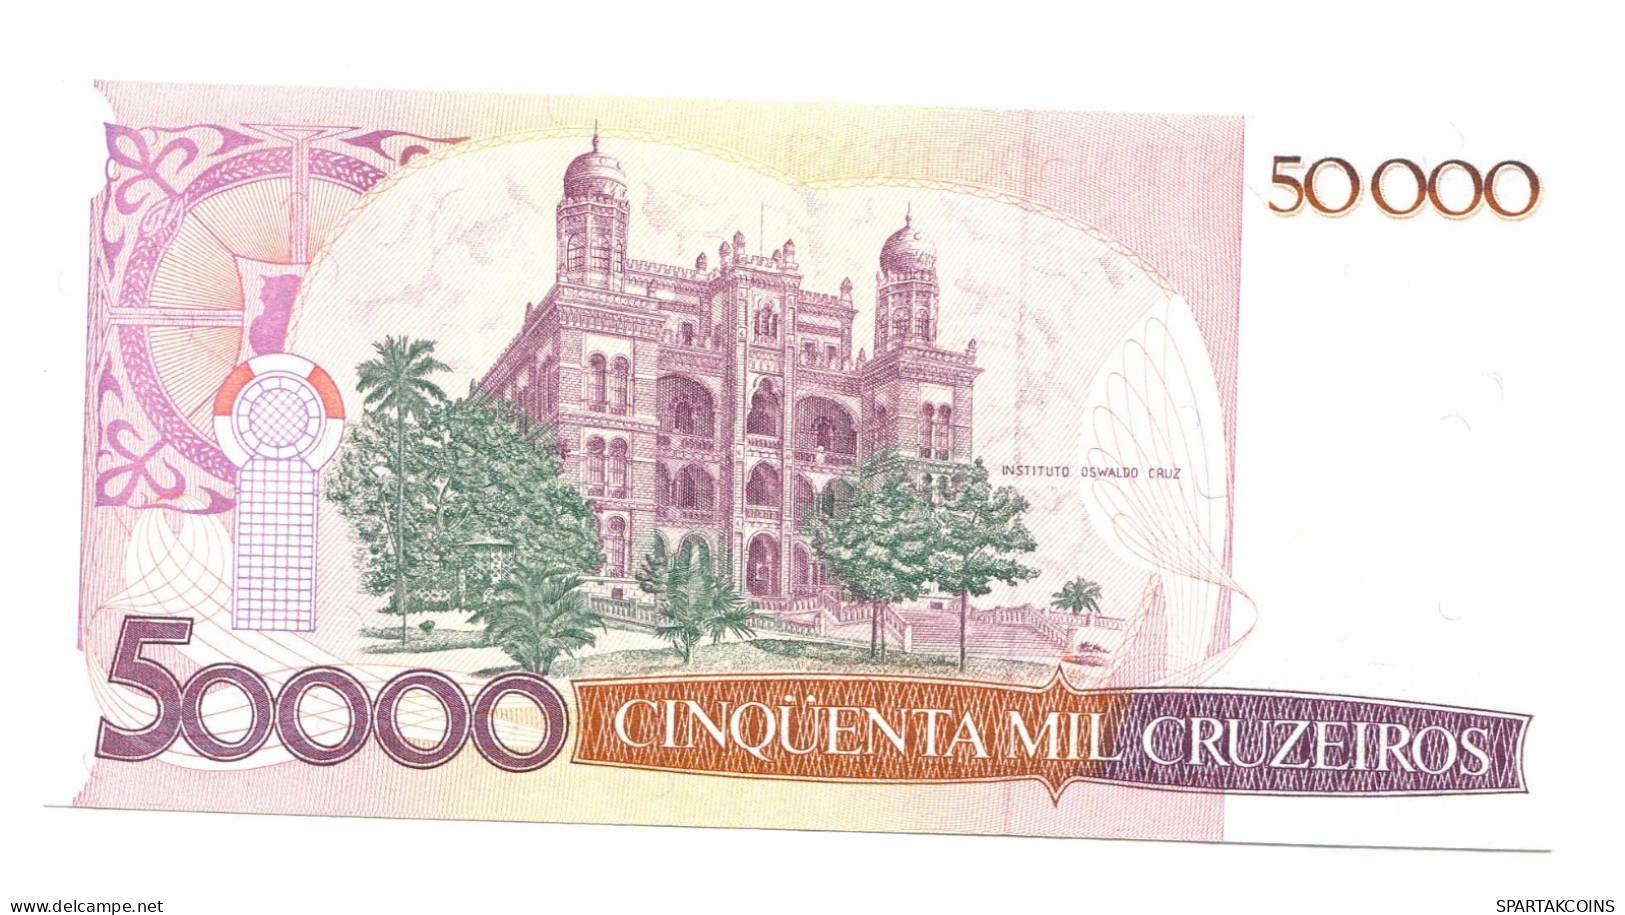 BRAZIL REPLACEMENT NOTE Star*A 50 CRUZADOS ON 50000 CRUZEIROS 1986 UNC P10984.6 - [11] Local Banknote Issues